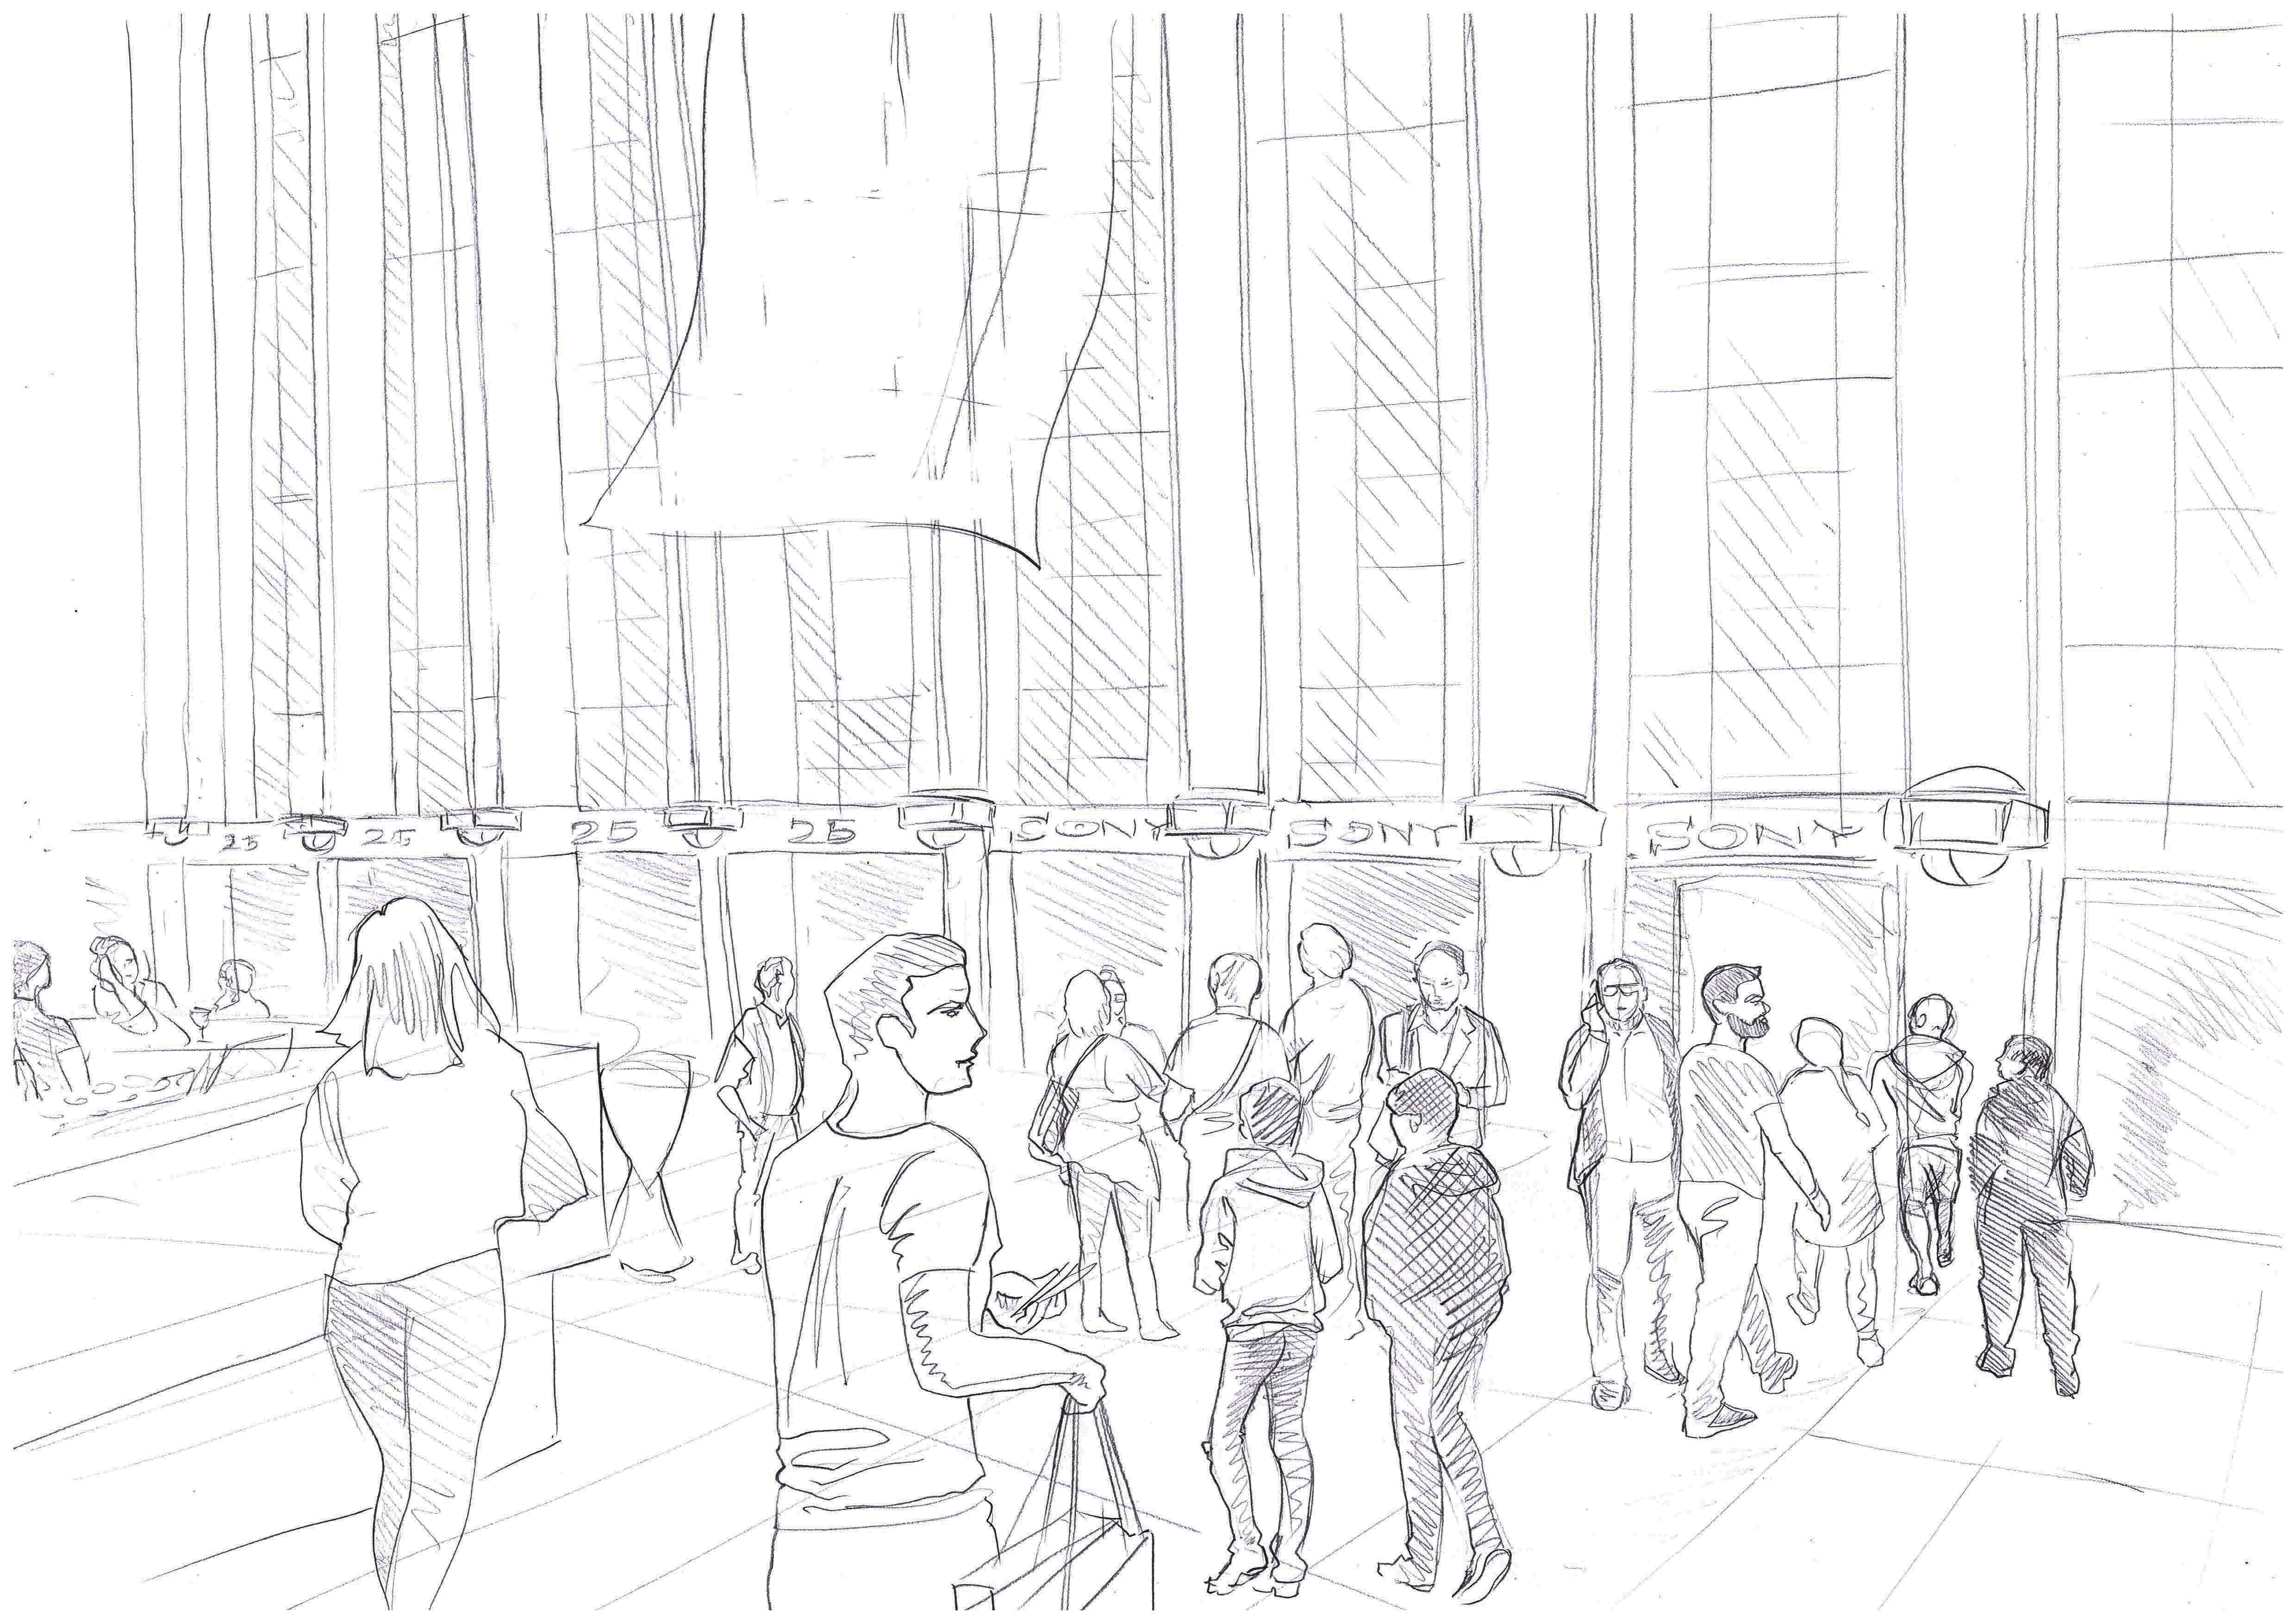 IFA 2018 ENTRANCE | pencil on paper